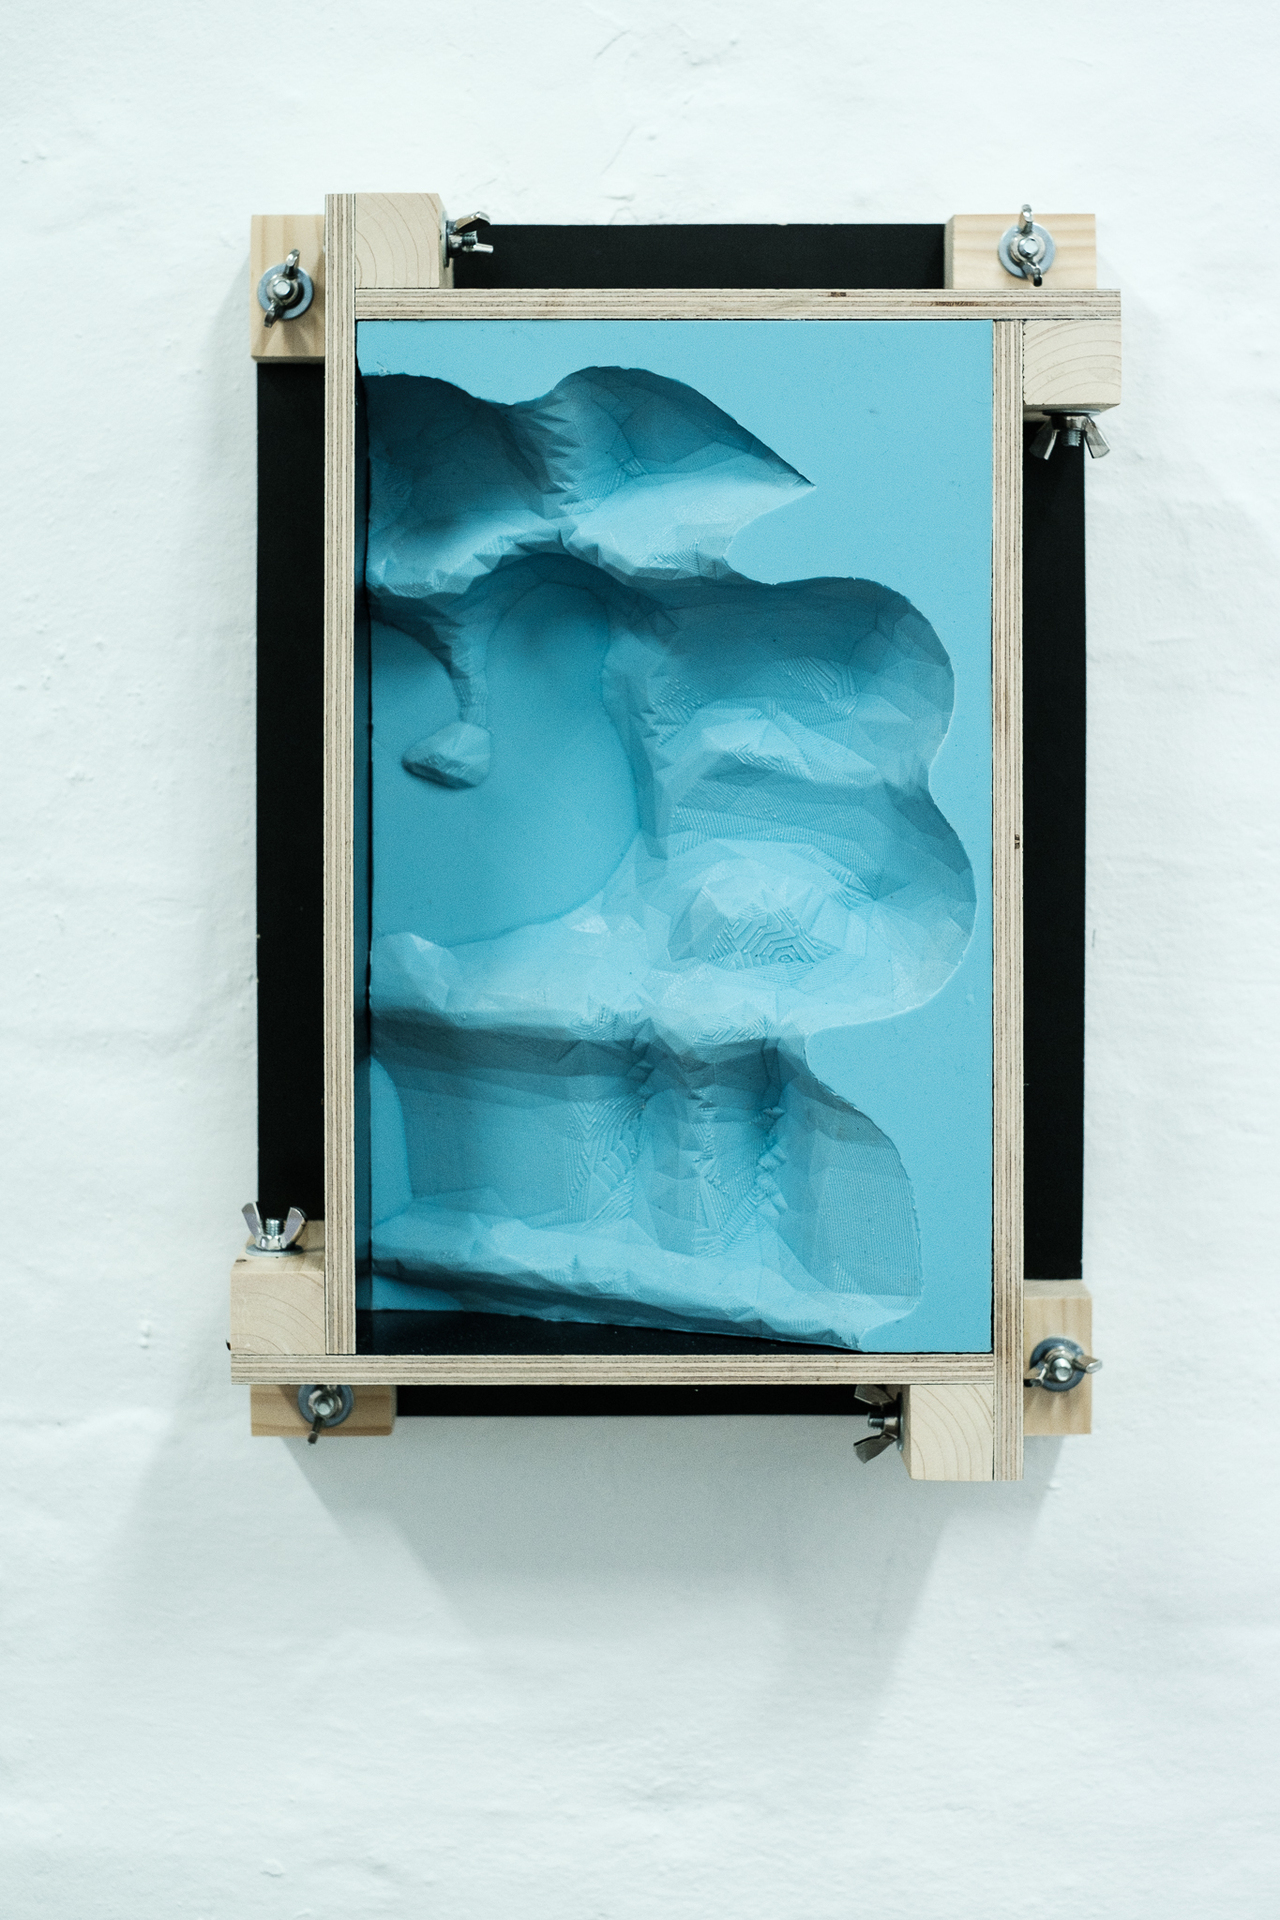 David Haack Monberg, Icons Made Without Hands [.GCODE .STL .RCP .ZIP .JPG .ETC], 2019, silicone, plywood, digital artefact reliefs, series of 6, 39 x 27 x 9 cm